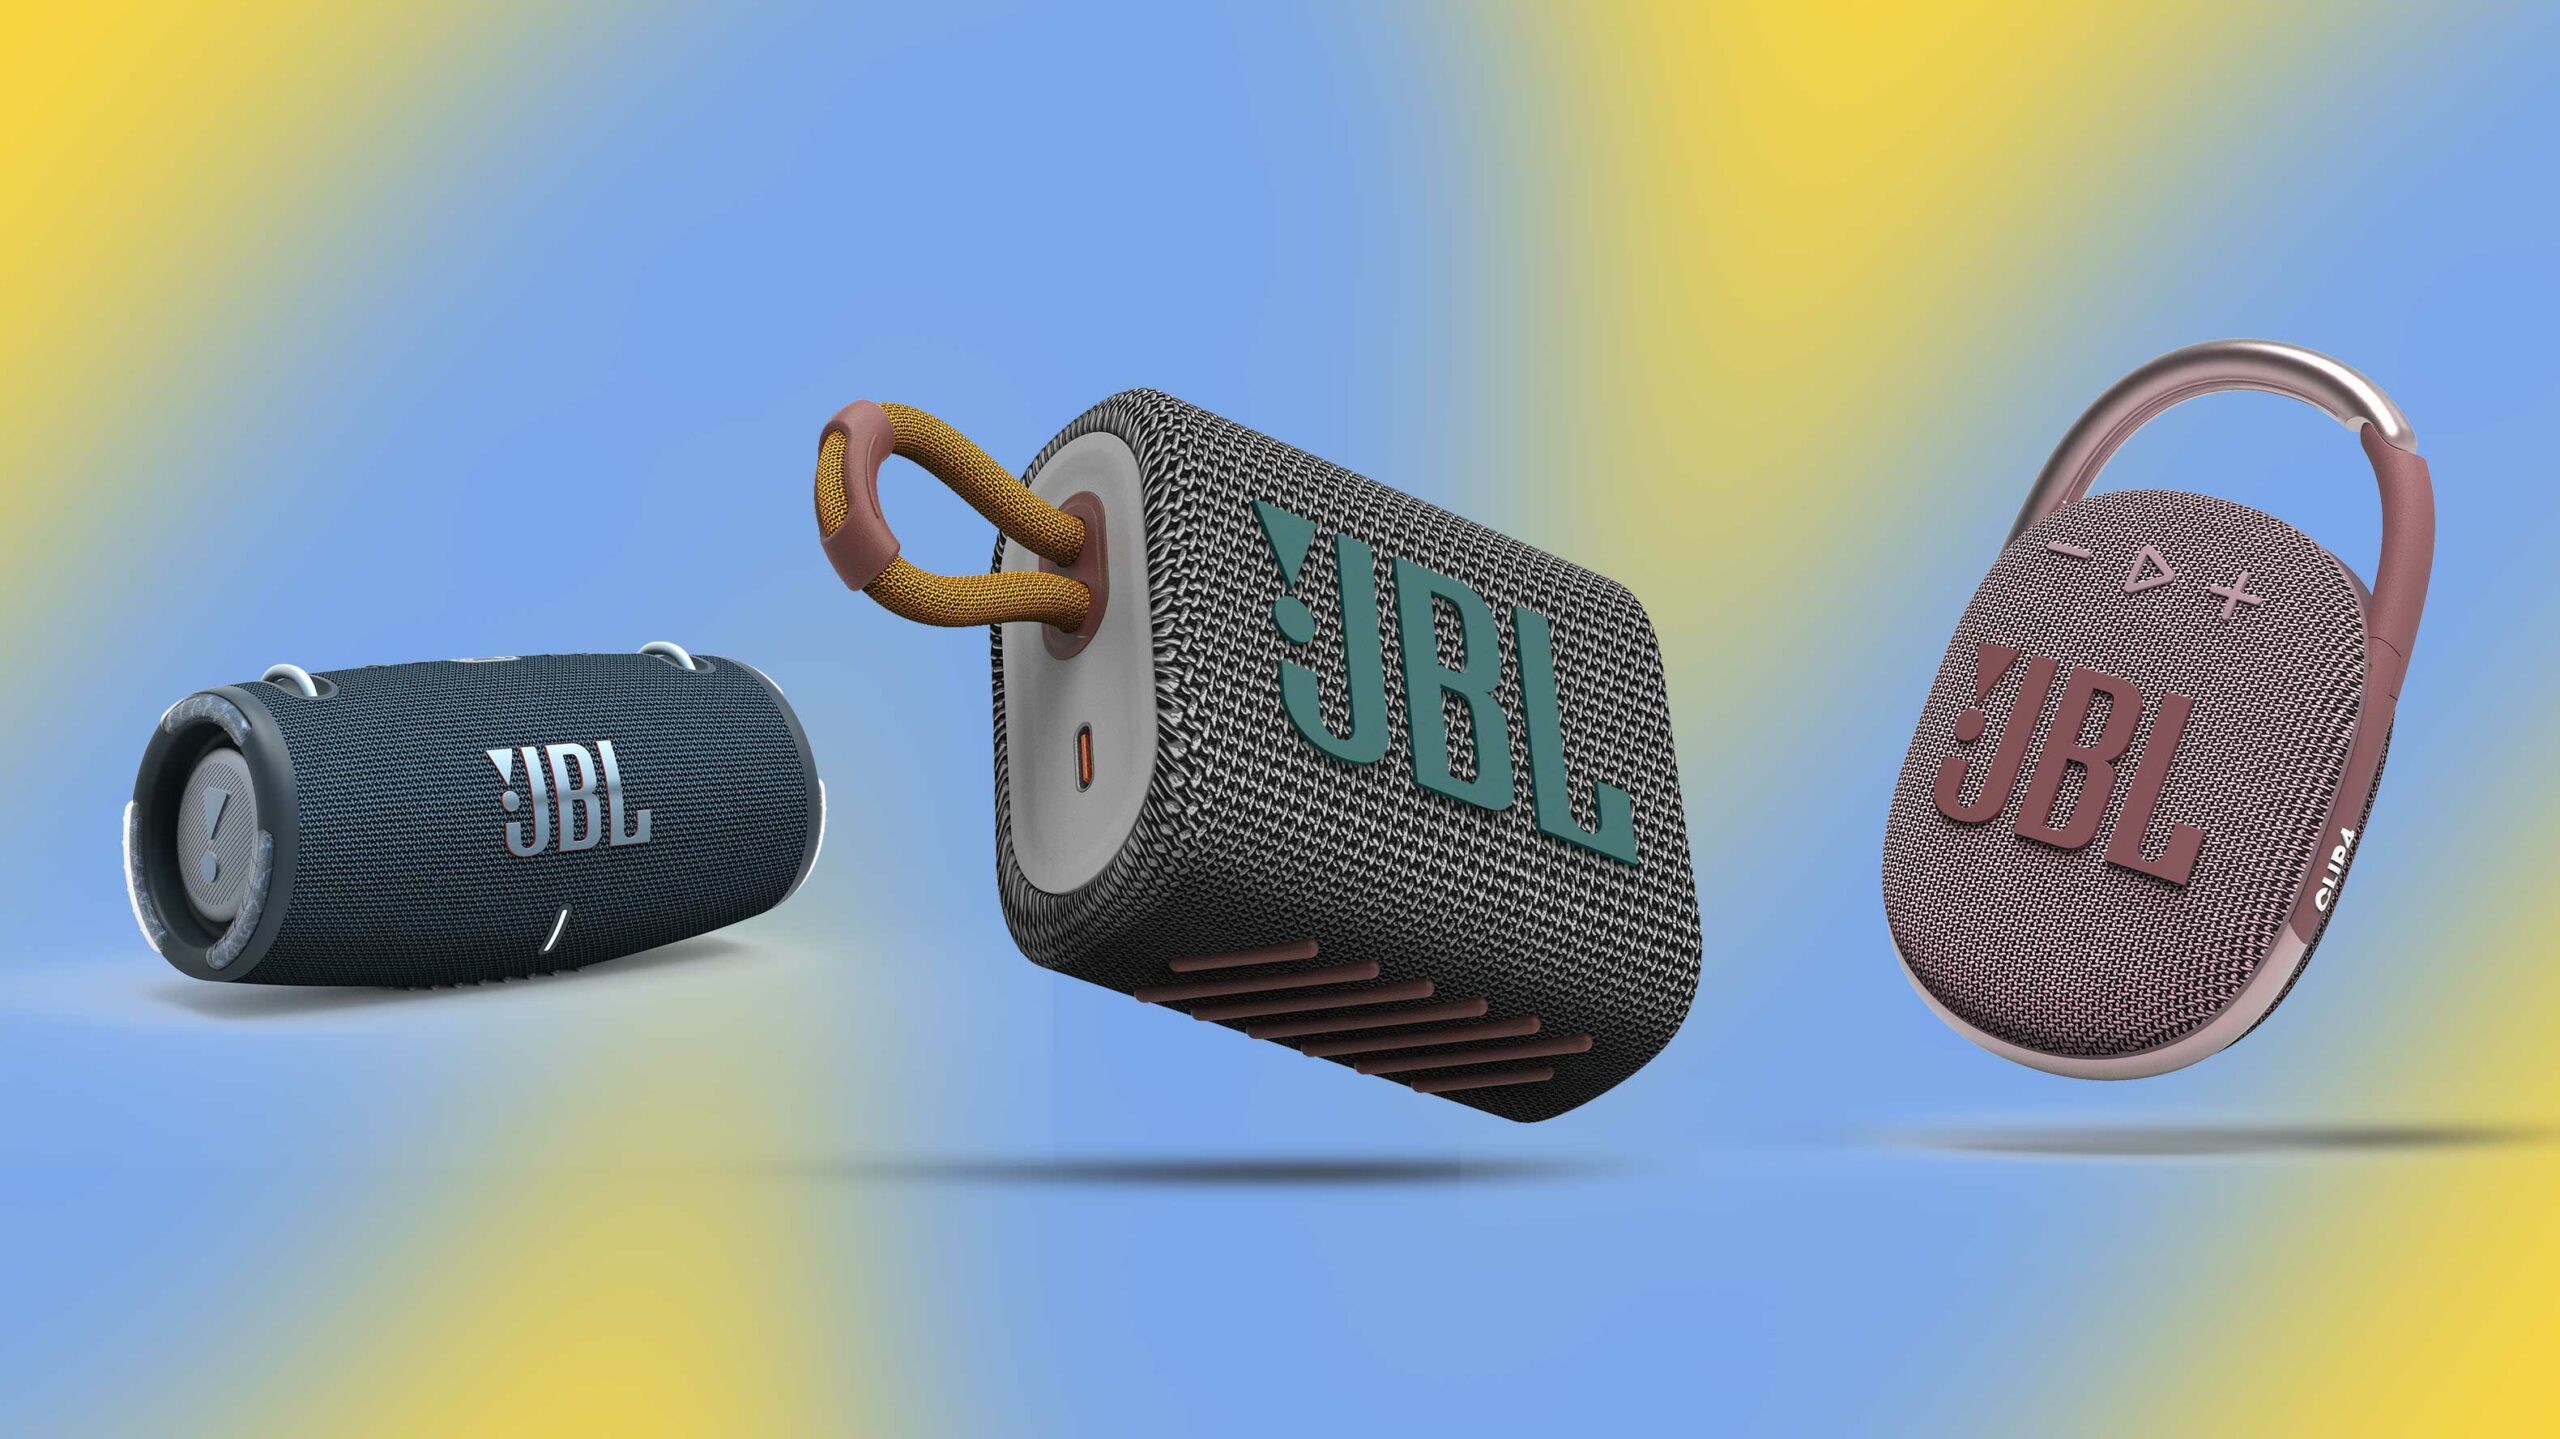 For pokker farvestof person JBL's new Bluetooth speakers looks awesome and use USB-C to charge